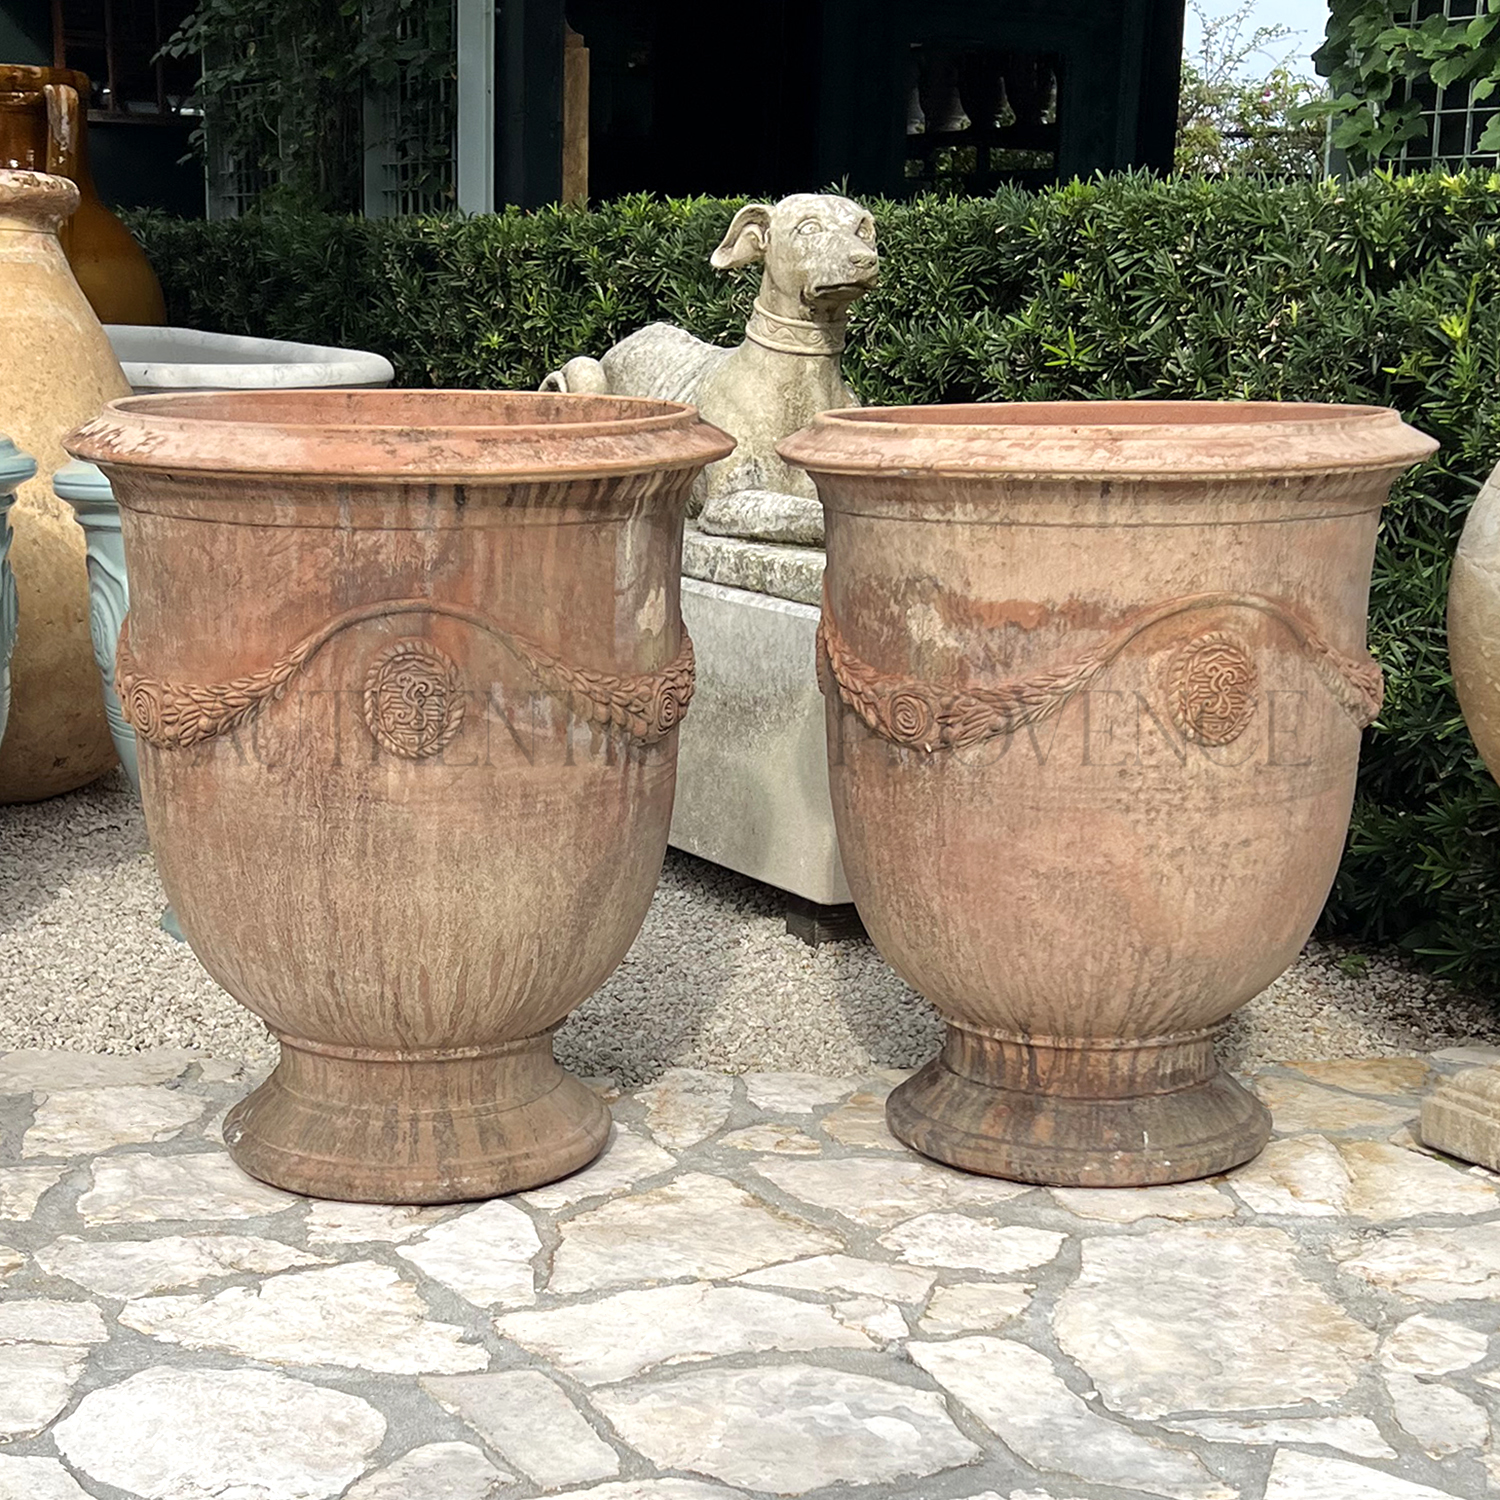 Pair of French Anduze Pots